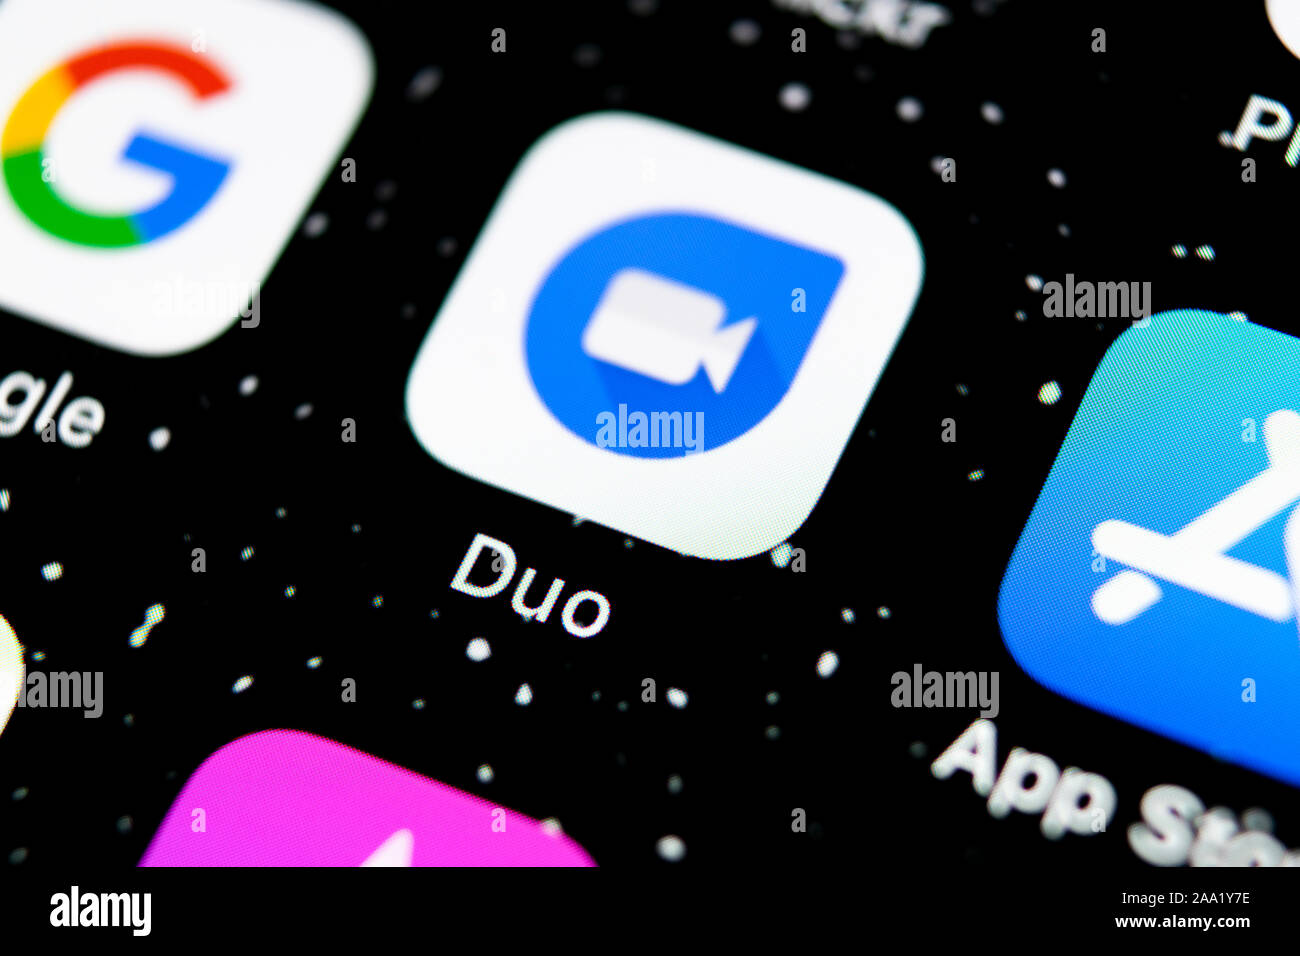 Sankt Petersburg Russia February 3 19 Google Duo Application Icon On Apple Iphone X Smartphone Screen Close Up Google Duo App Icon Social Netw Stock Photo Alamy